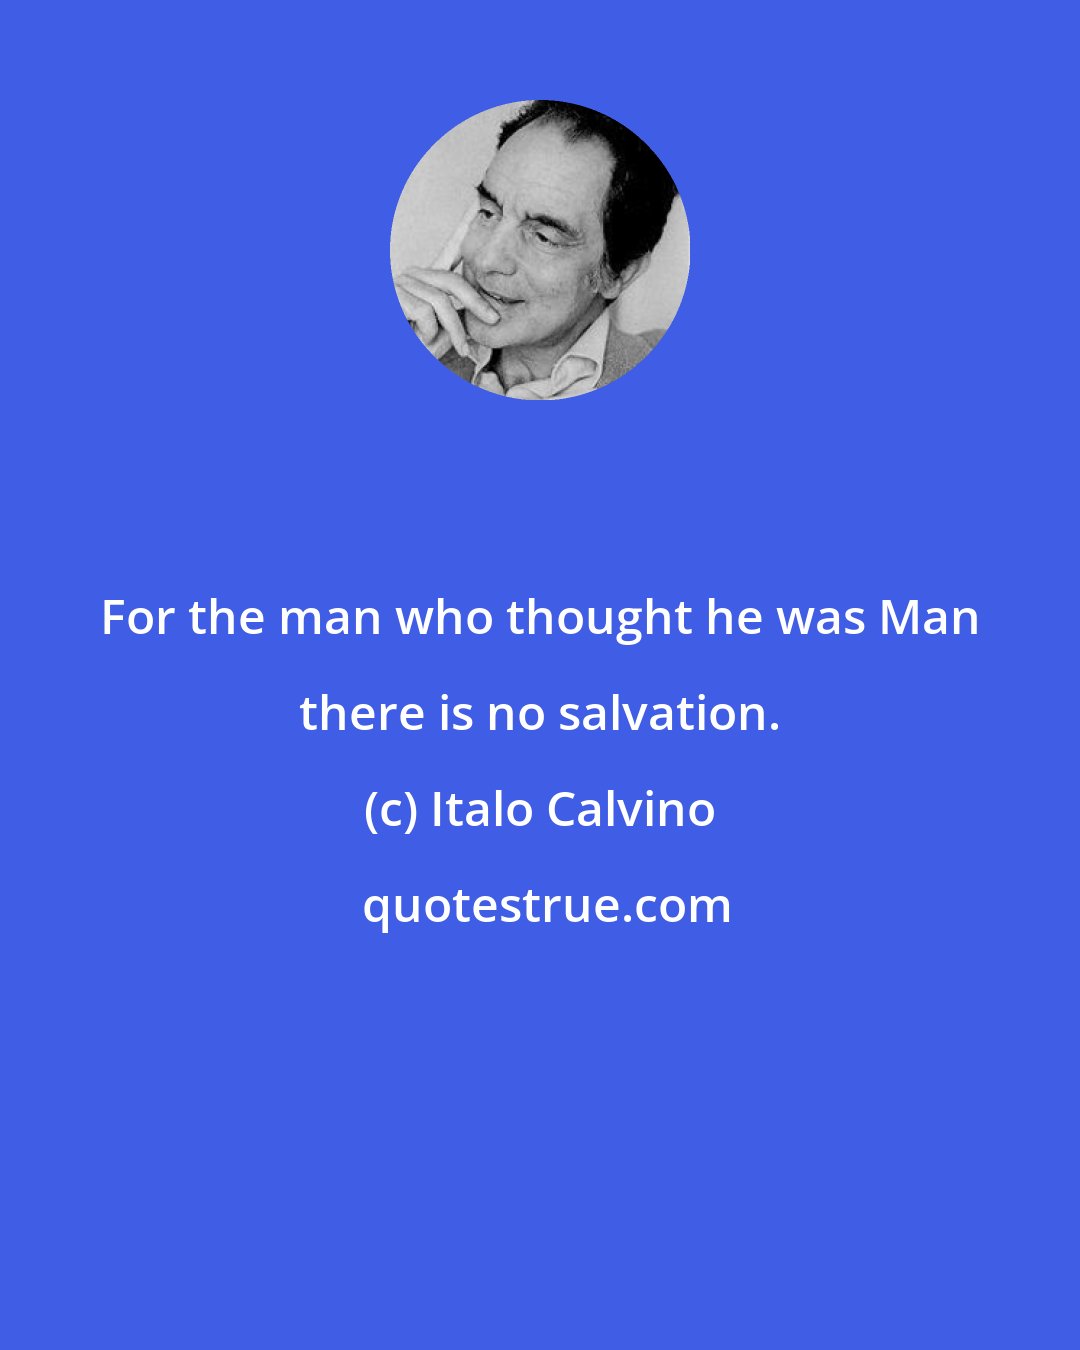 Italo Calvino: For the man who thought he was Man there is no salvation.